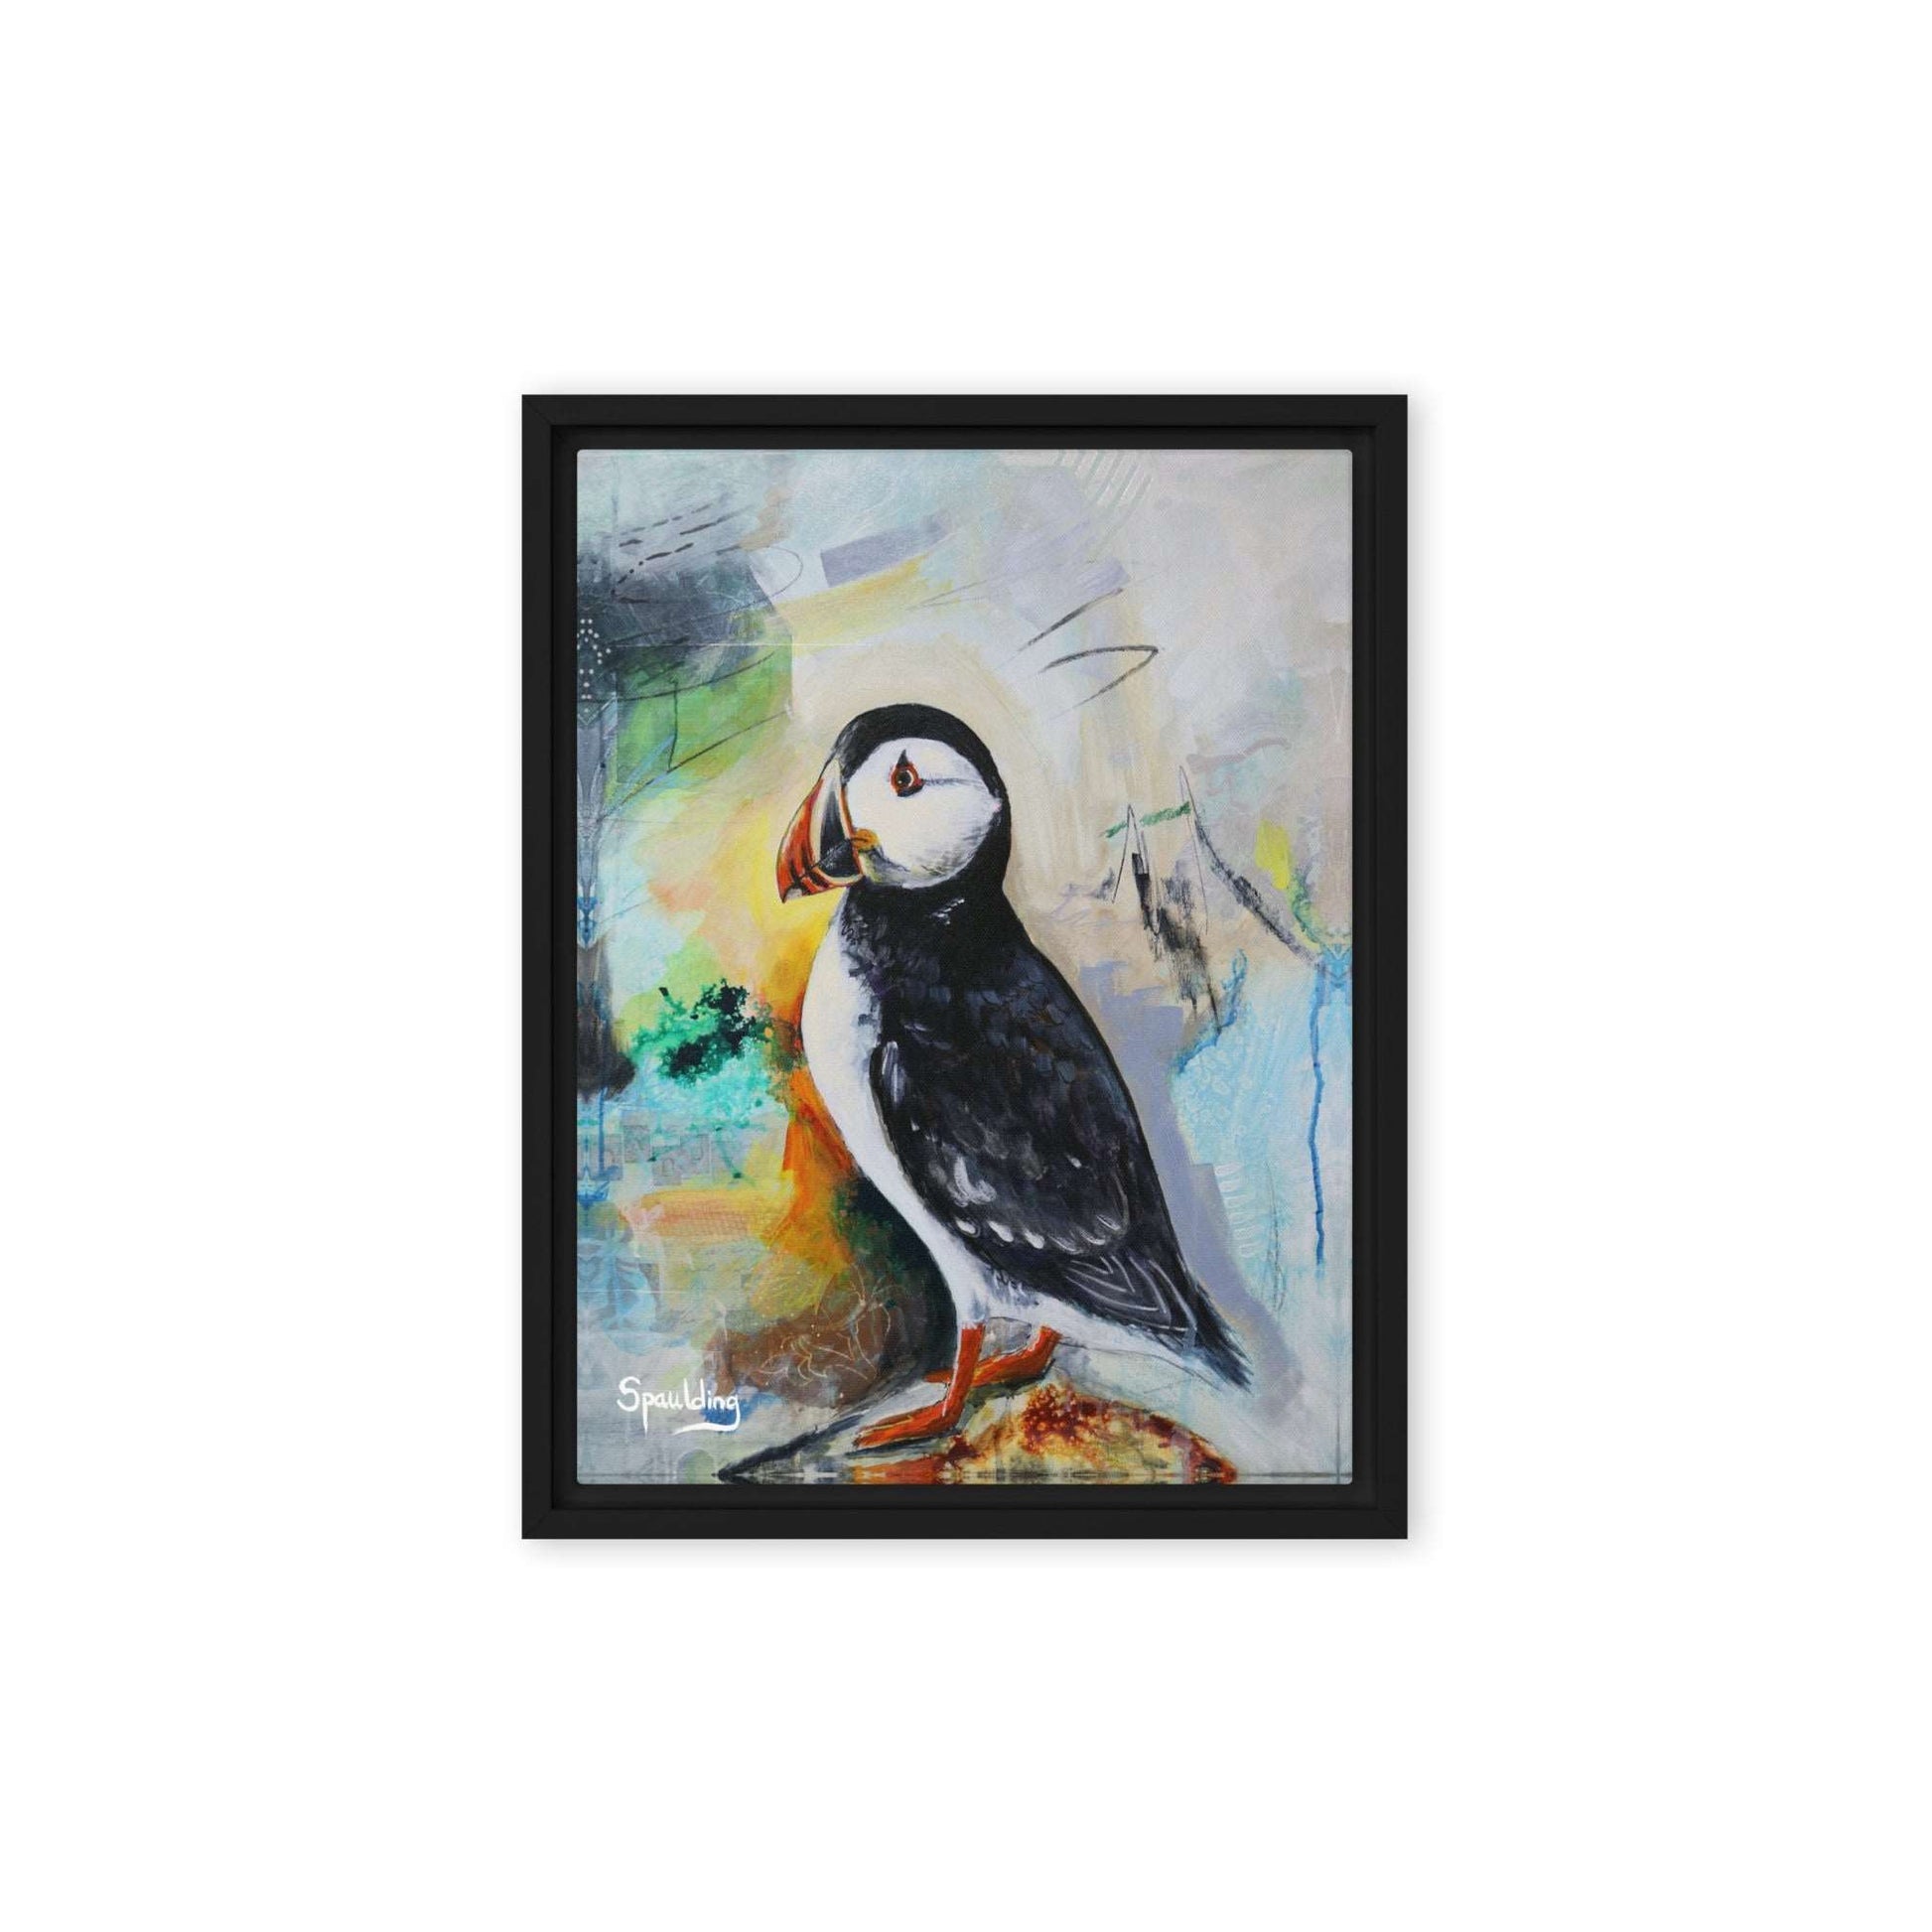 Framed canvas print of a black and white puffin with orange beak and feet standing on a rock. The background is a color palette of light tans, yellows, blues, greens and some black. 